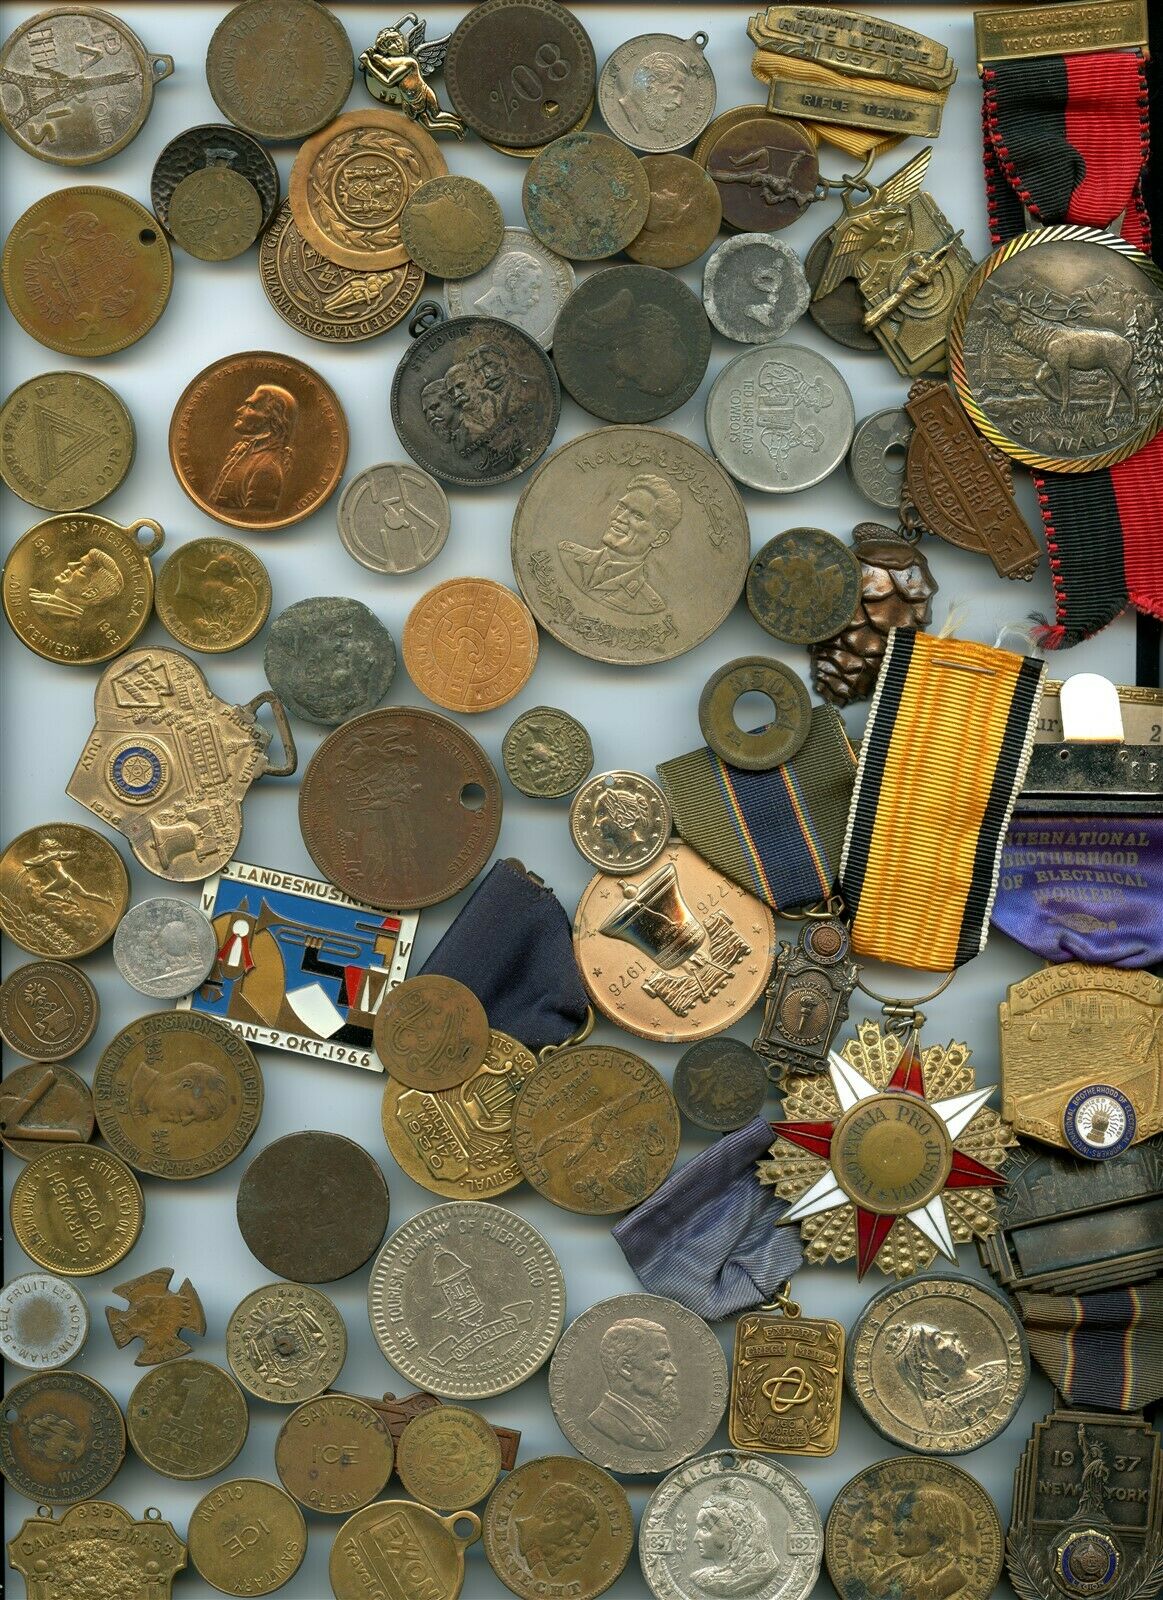 Large Lot Exonumia Tokens Medals Pins Many Types Nice Lot Some Junk Some Better